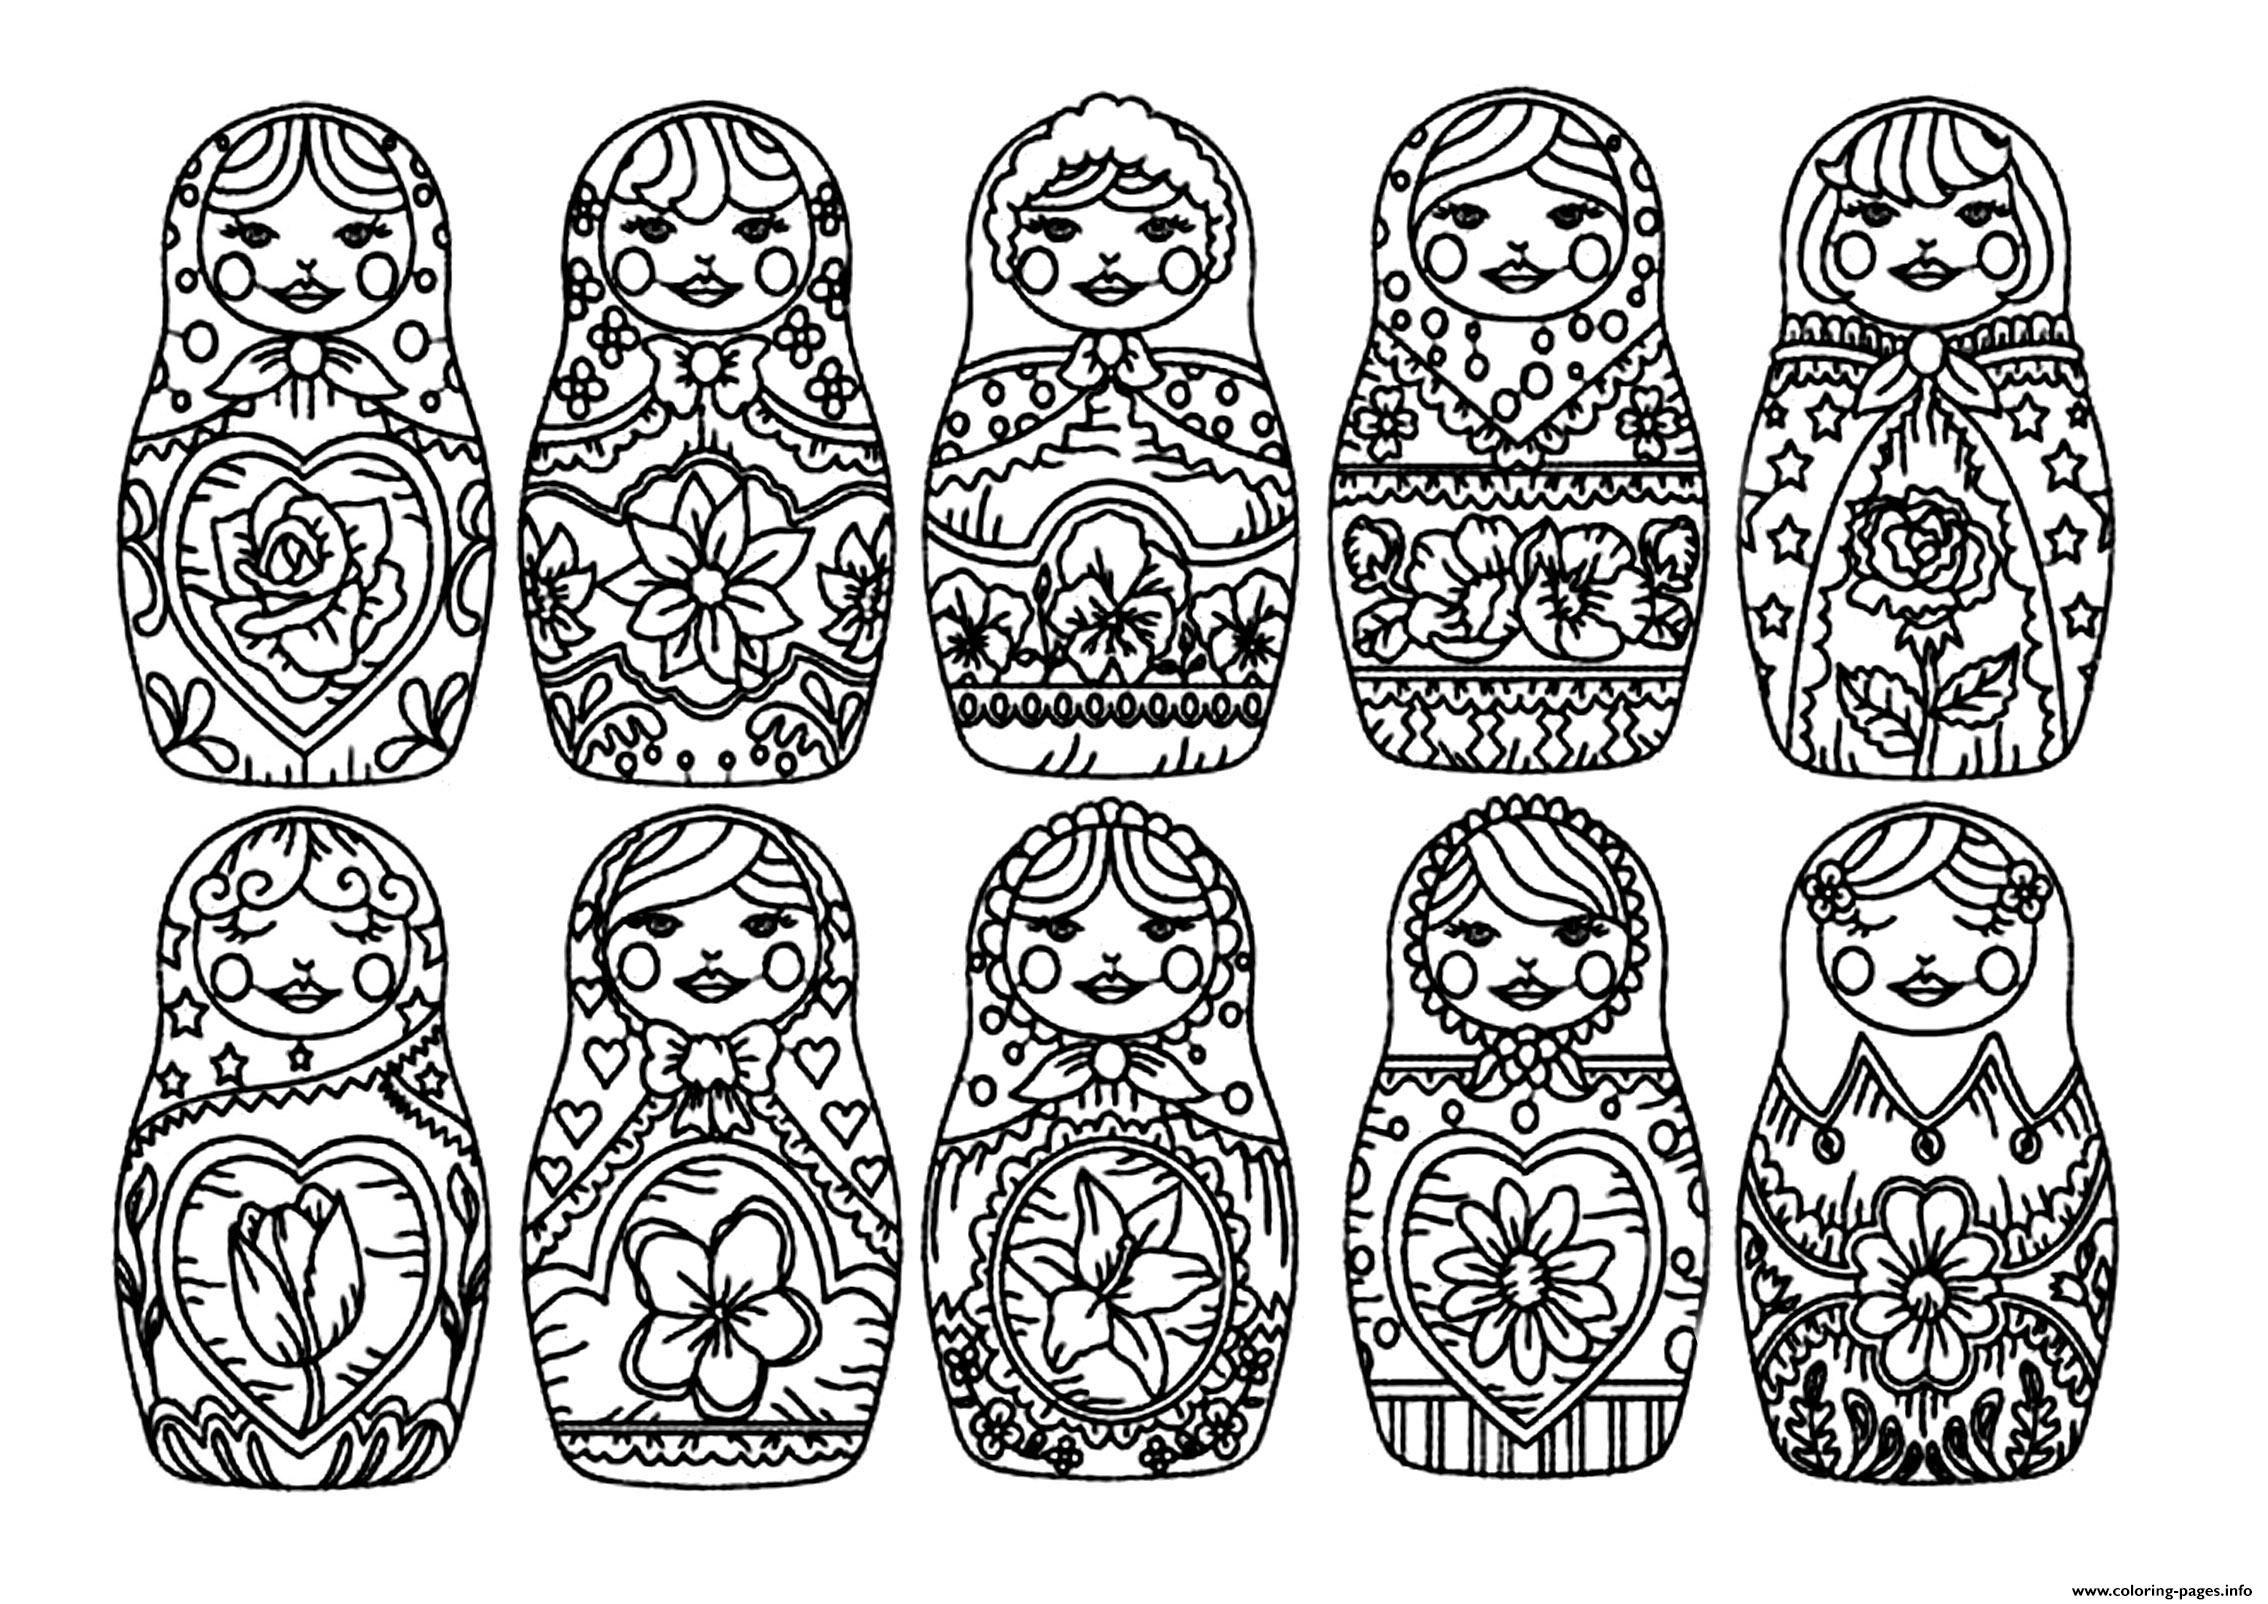 Best Russian Dolls Adult coloring